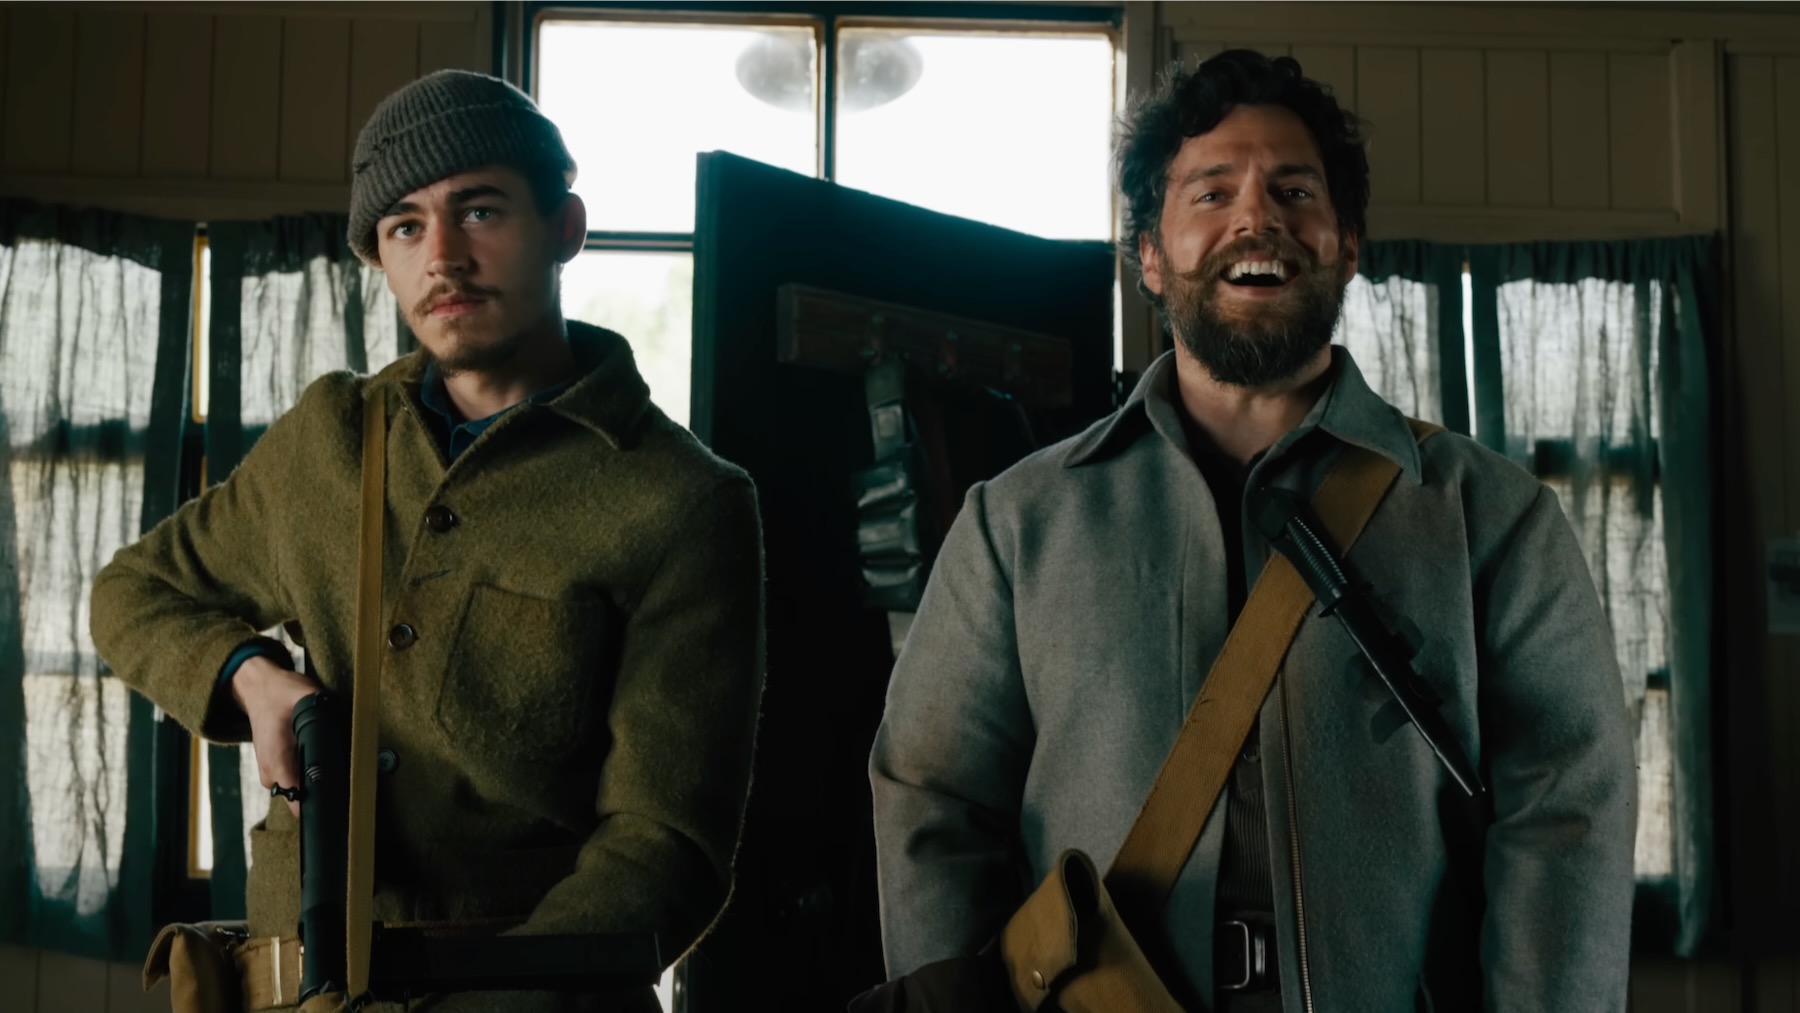 Guy Ritchie Reveals Trailer For New Film The Ministry of Ungentlemanly Warfare: Watch